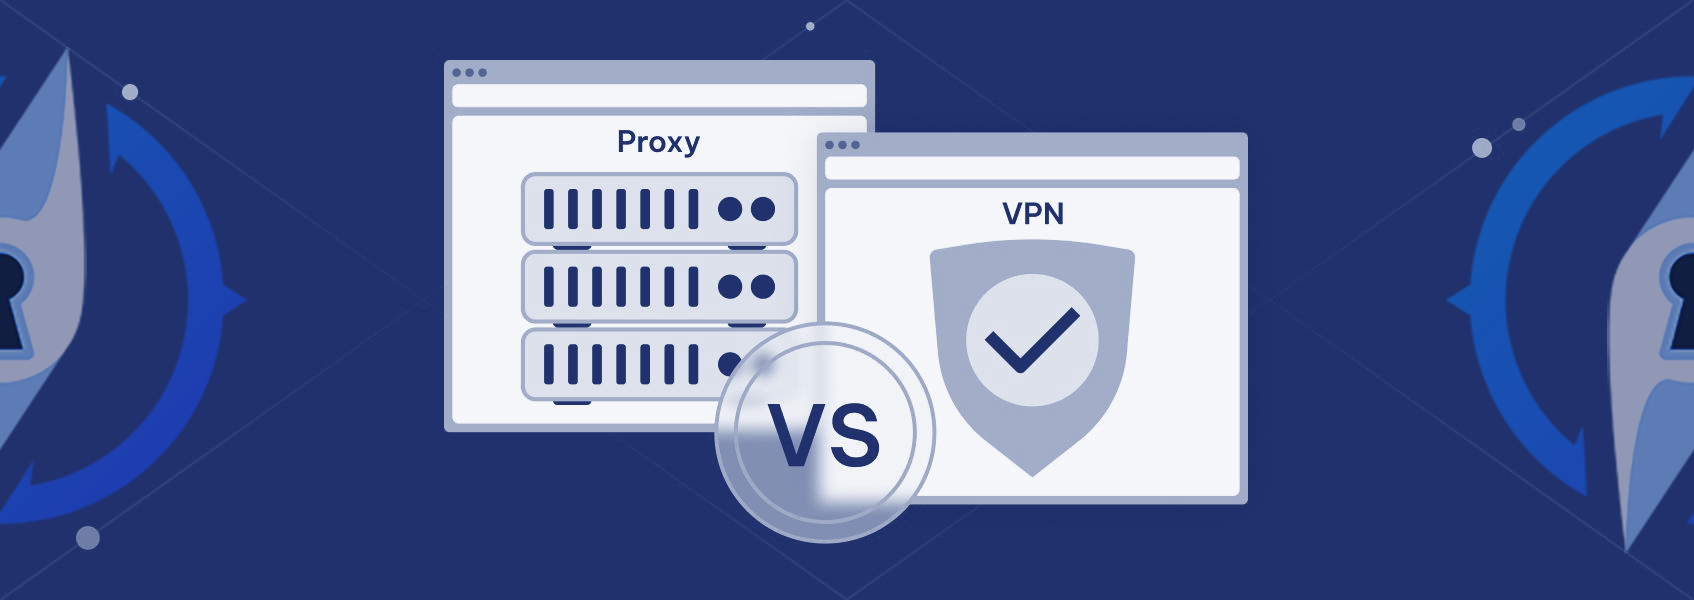 Deciphering the Differences: Proxy vs. VPN